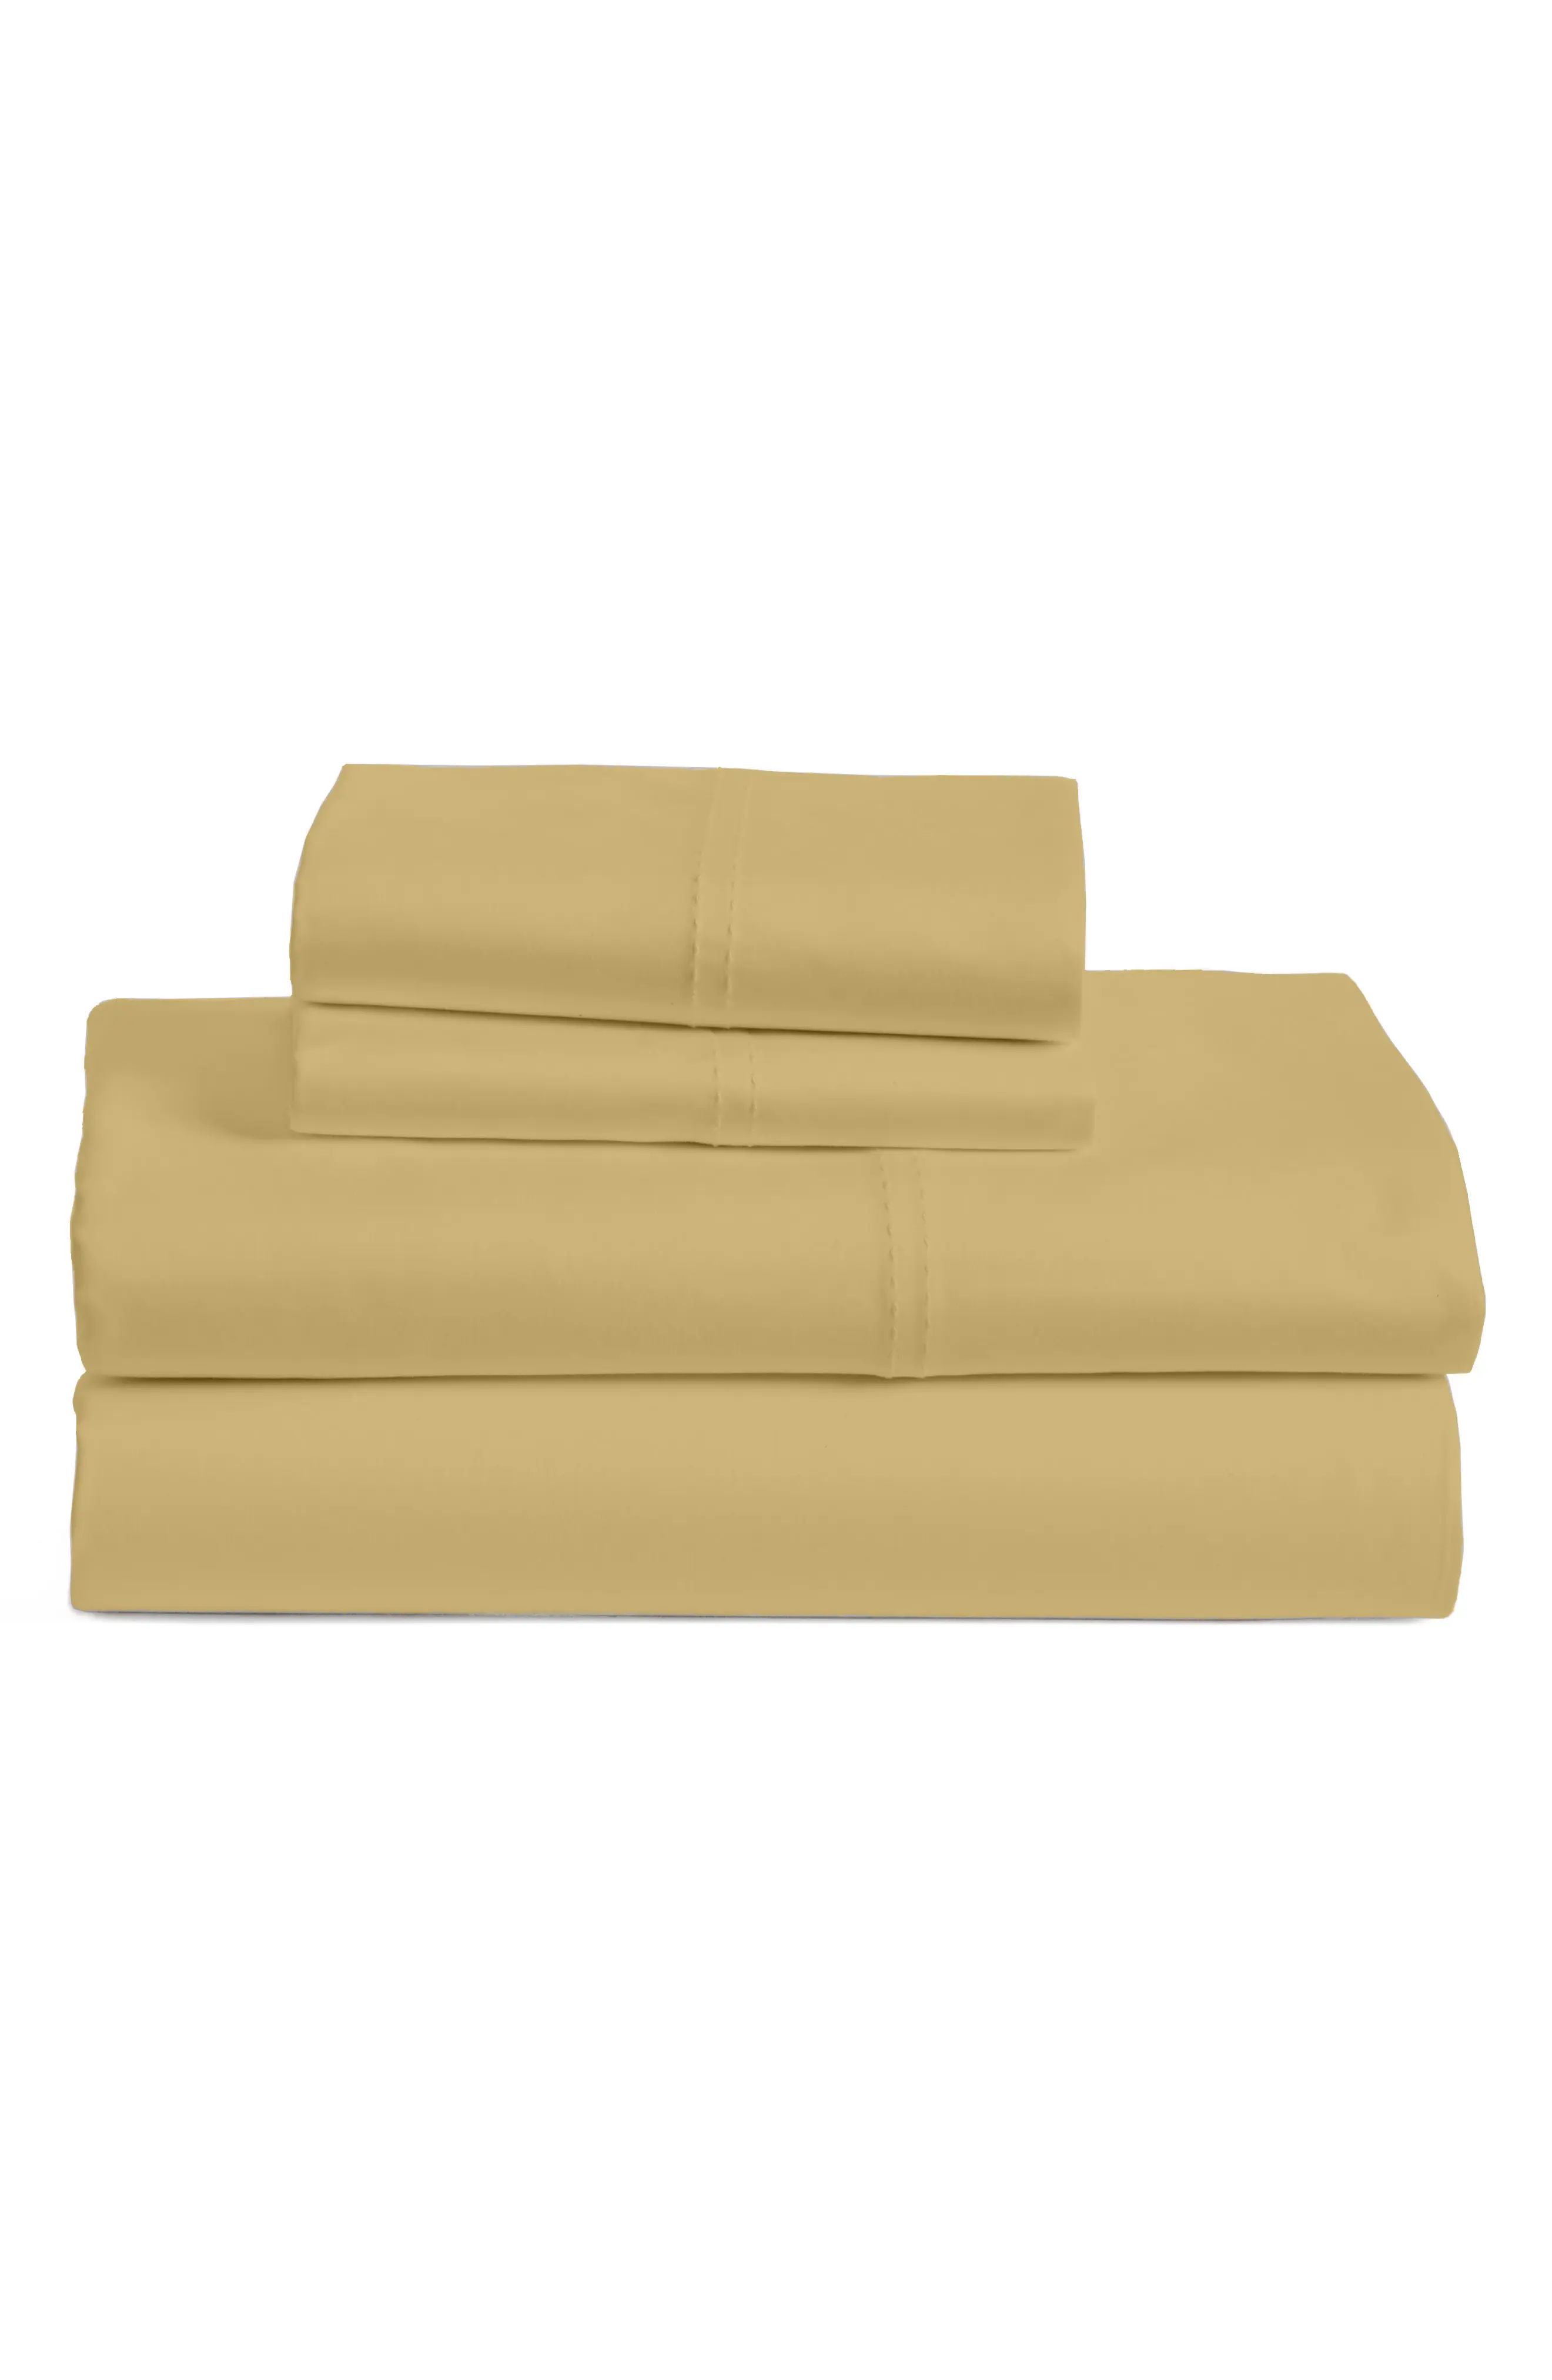 Nordstrom at Home 400 Thread Count Sheet Set in Yellow Cocoon at Nordstrom, Size California King | Nordstrom